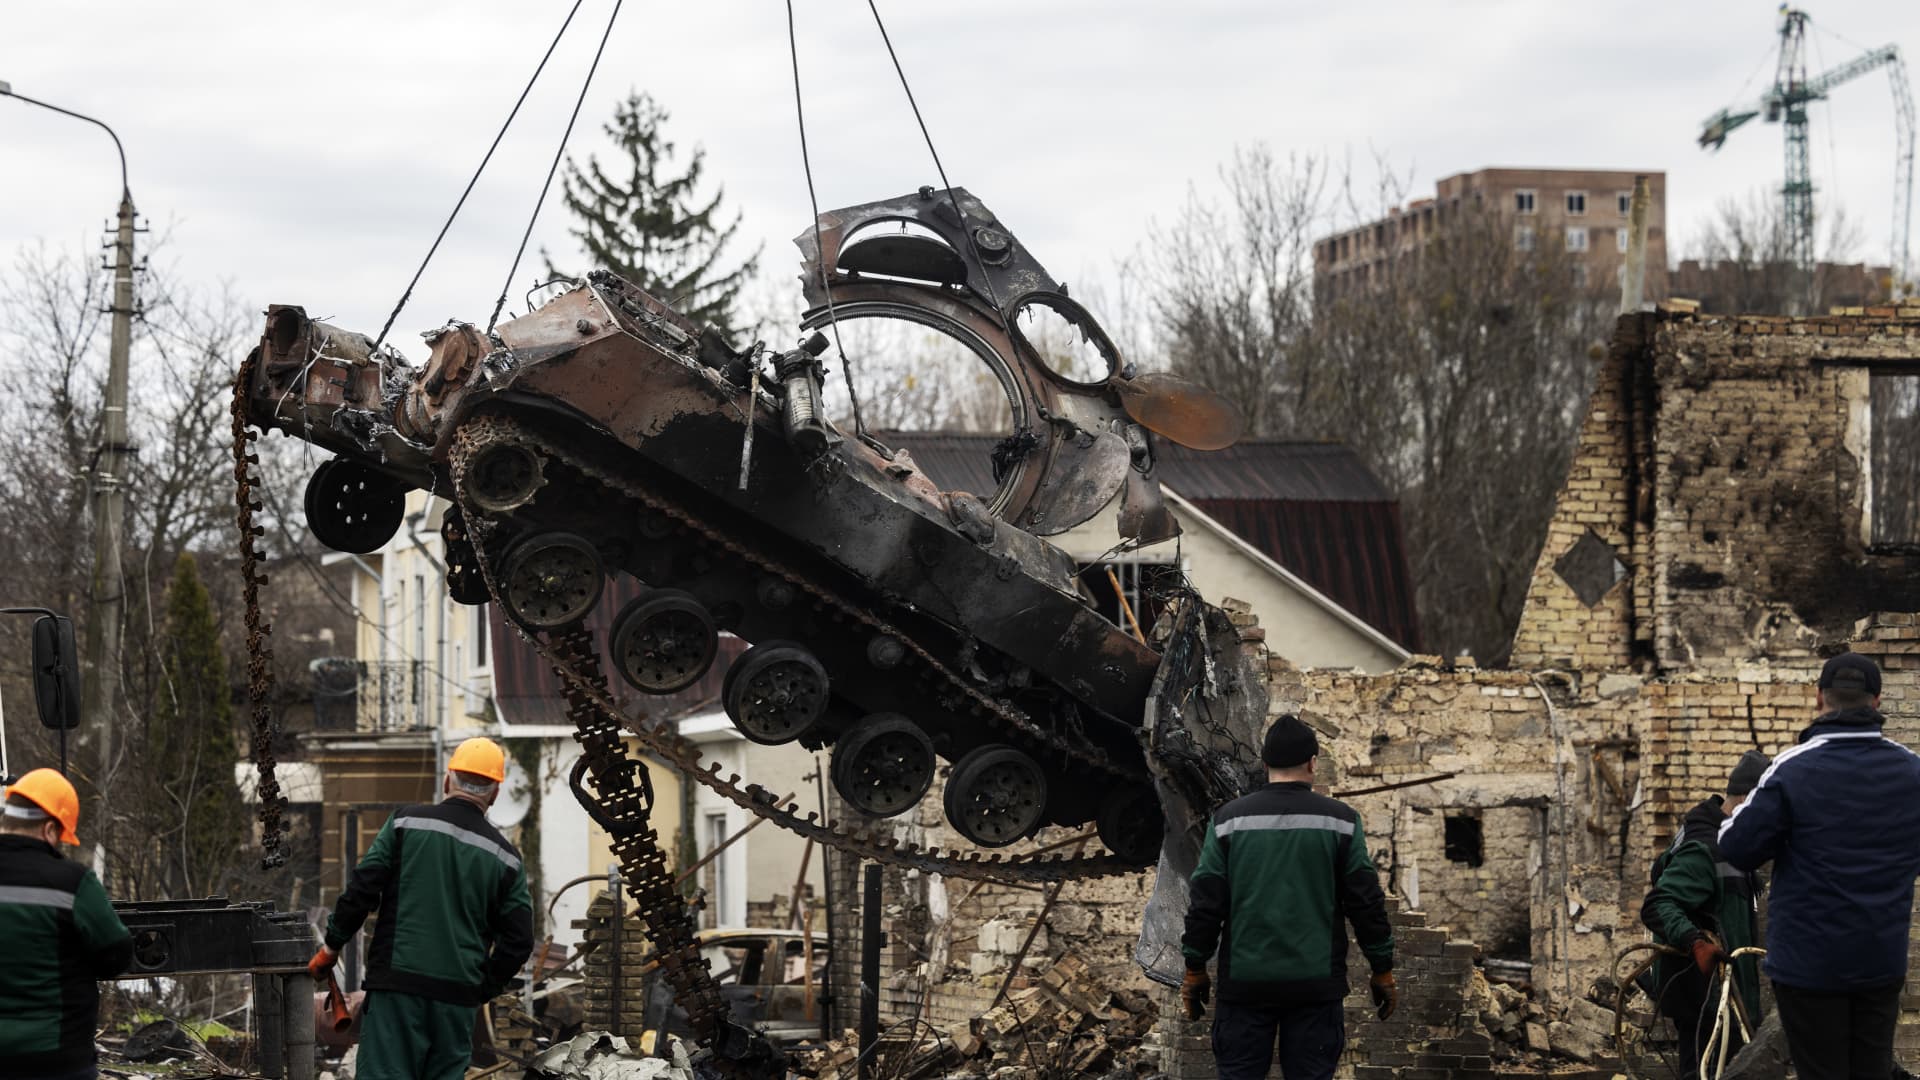 A destroyed Russian tanks is removed on April 5, 2022 in Bucha, Ukraine.